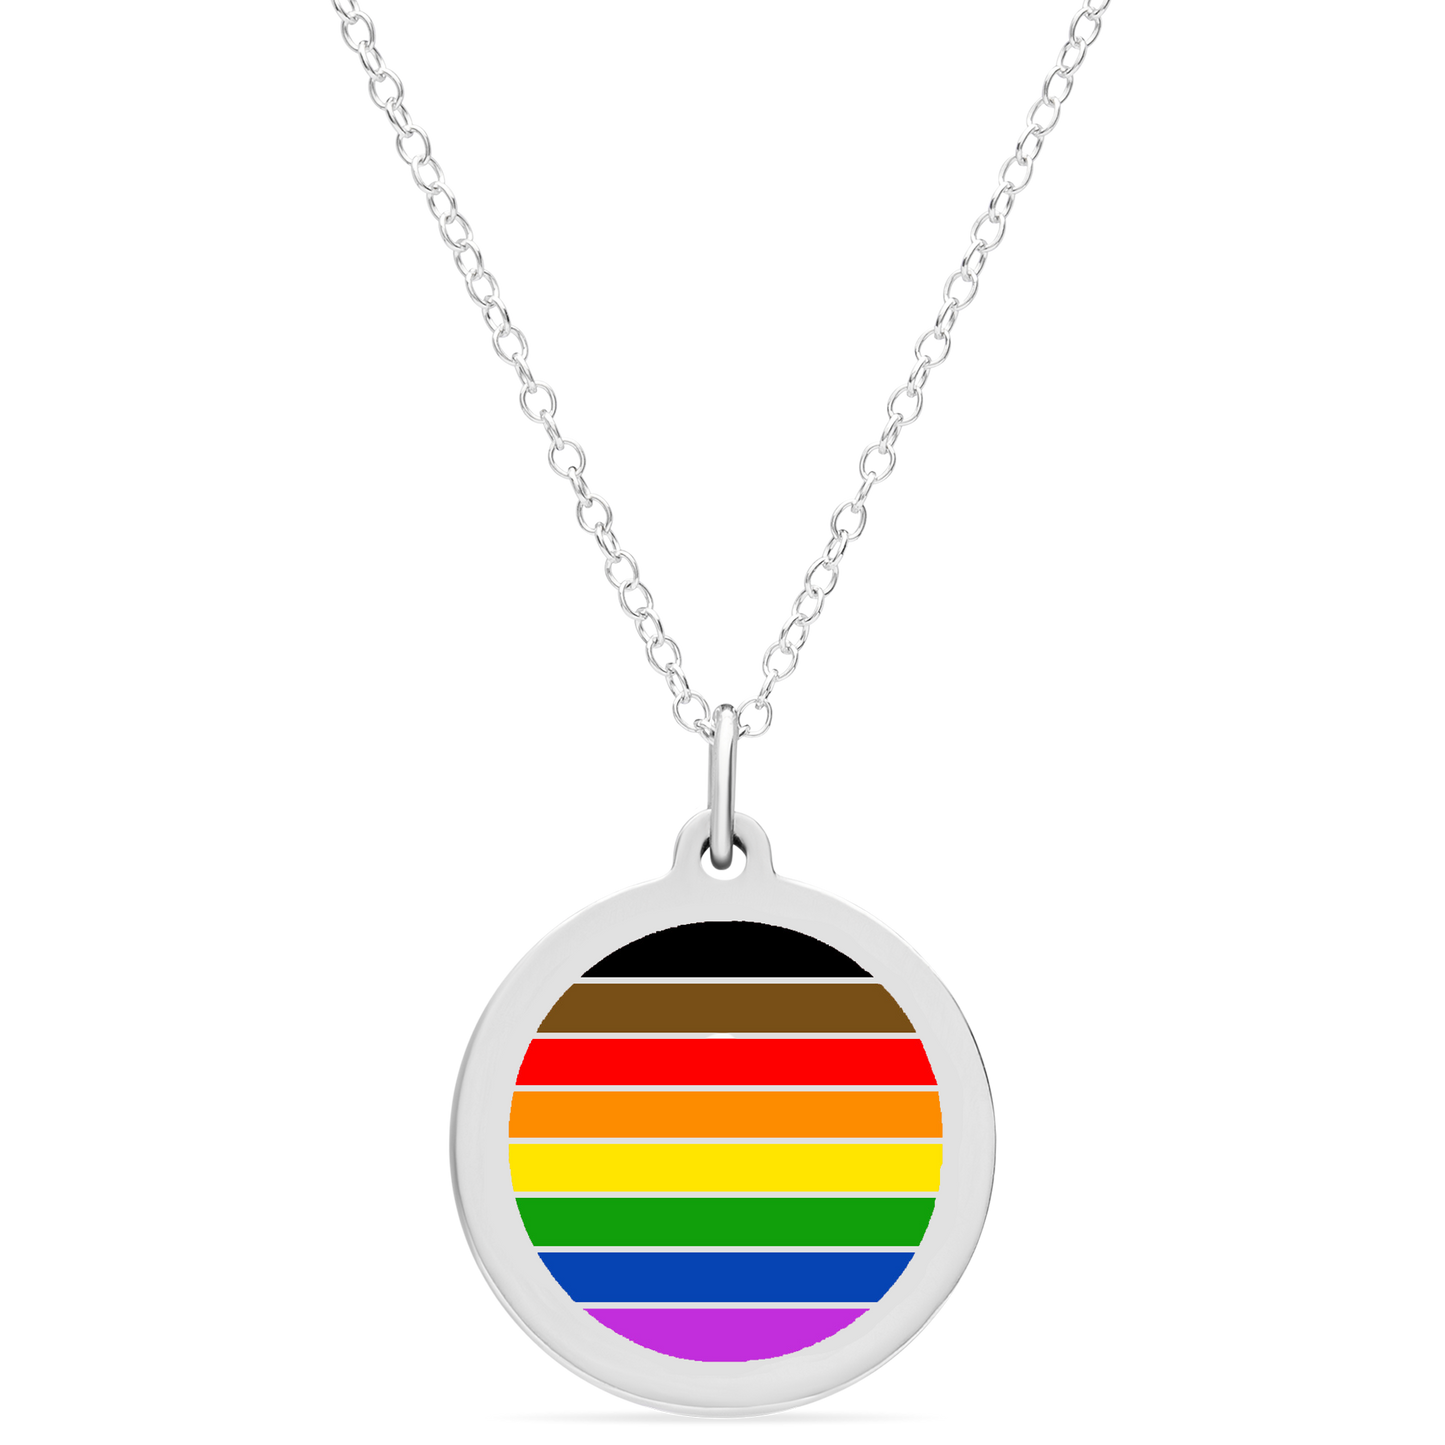 RAINBOW FLAG CHARM in sterling silver with rhodium plate